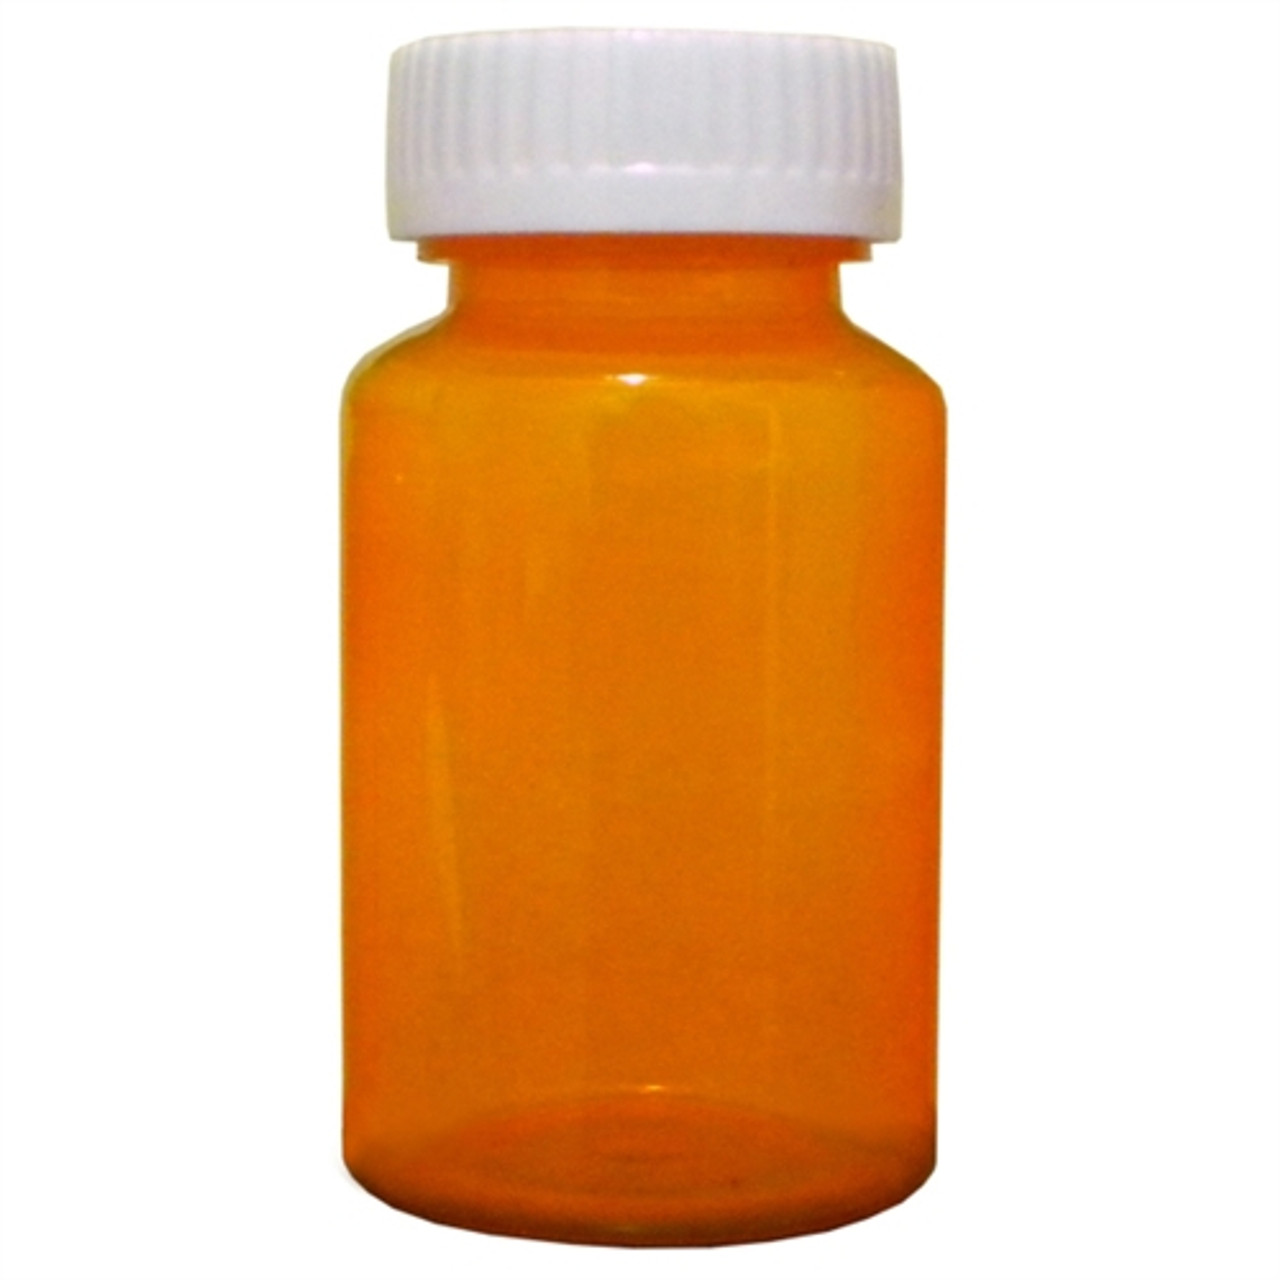 50 Pack Empty Pill Bottles with Caps - 13 Dram Medicine Containers